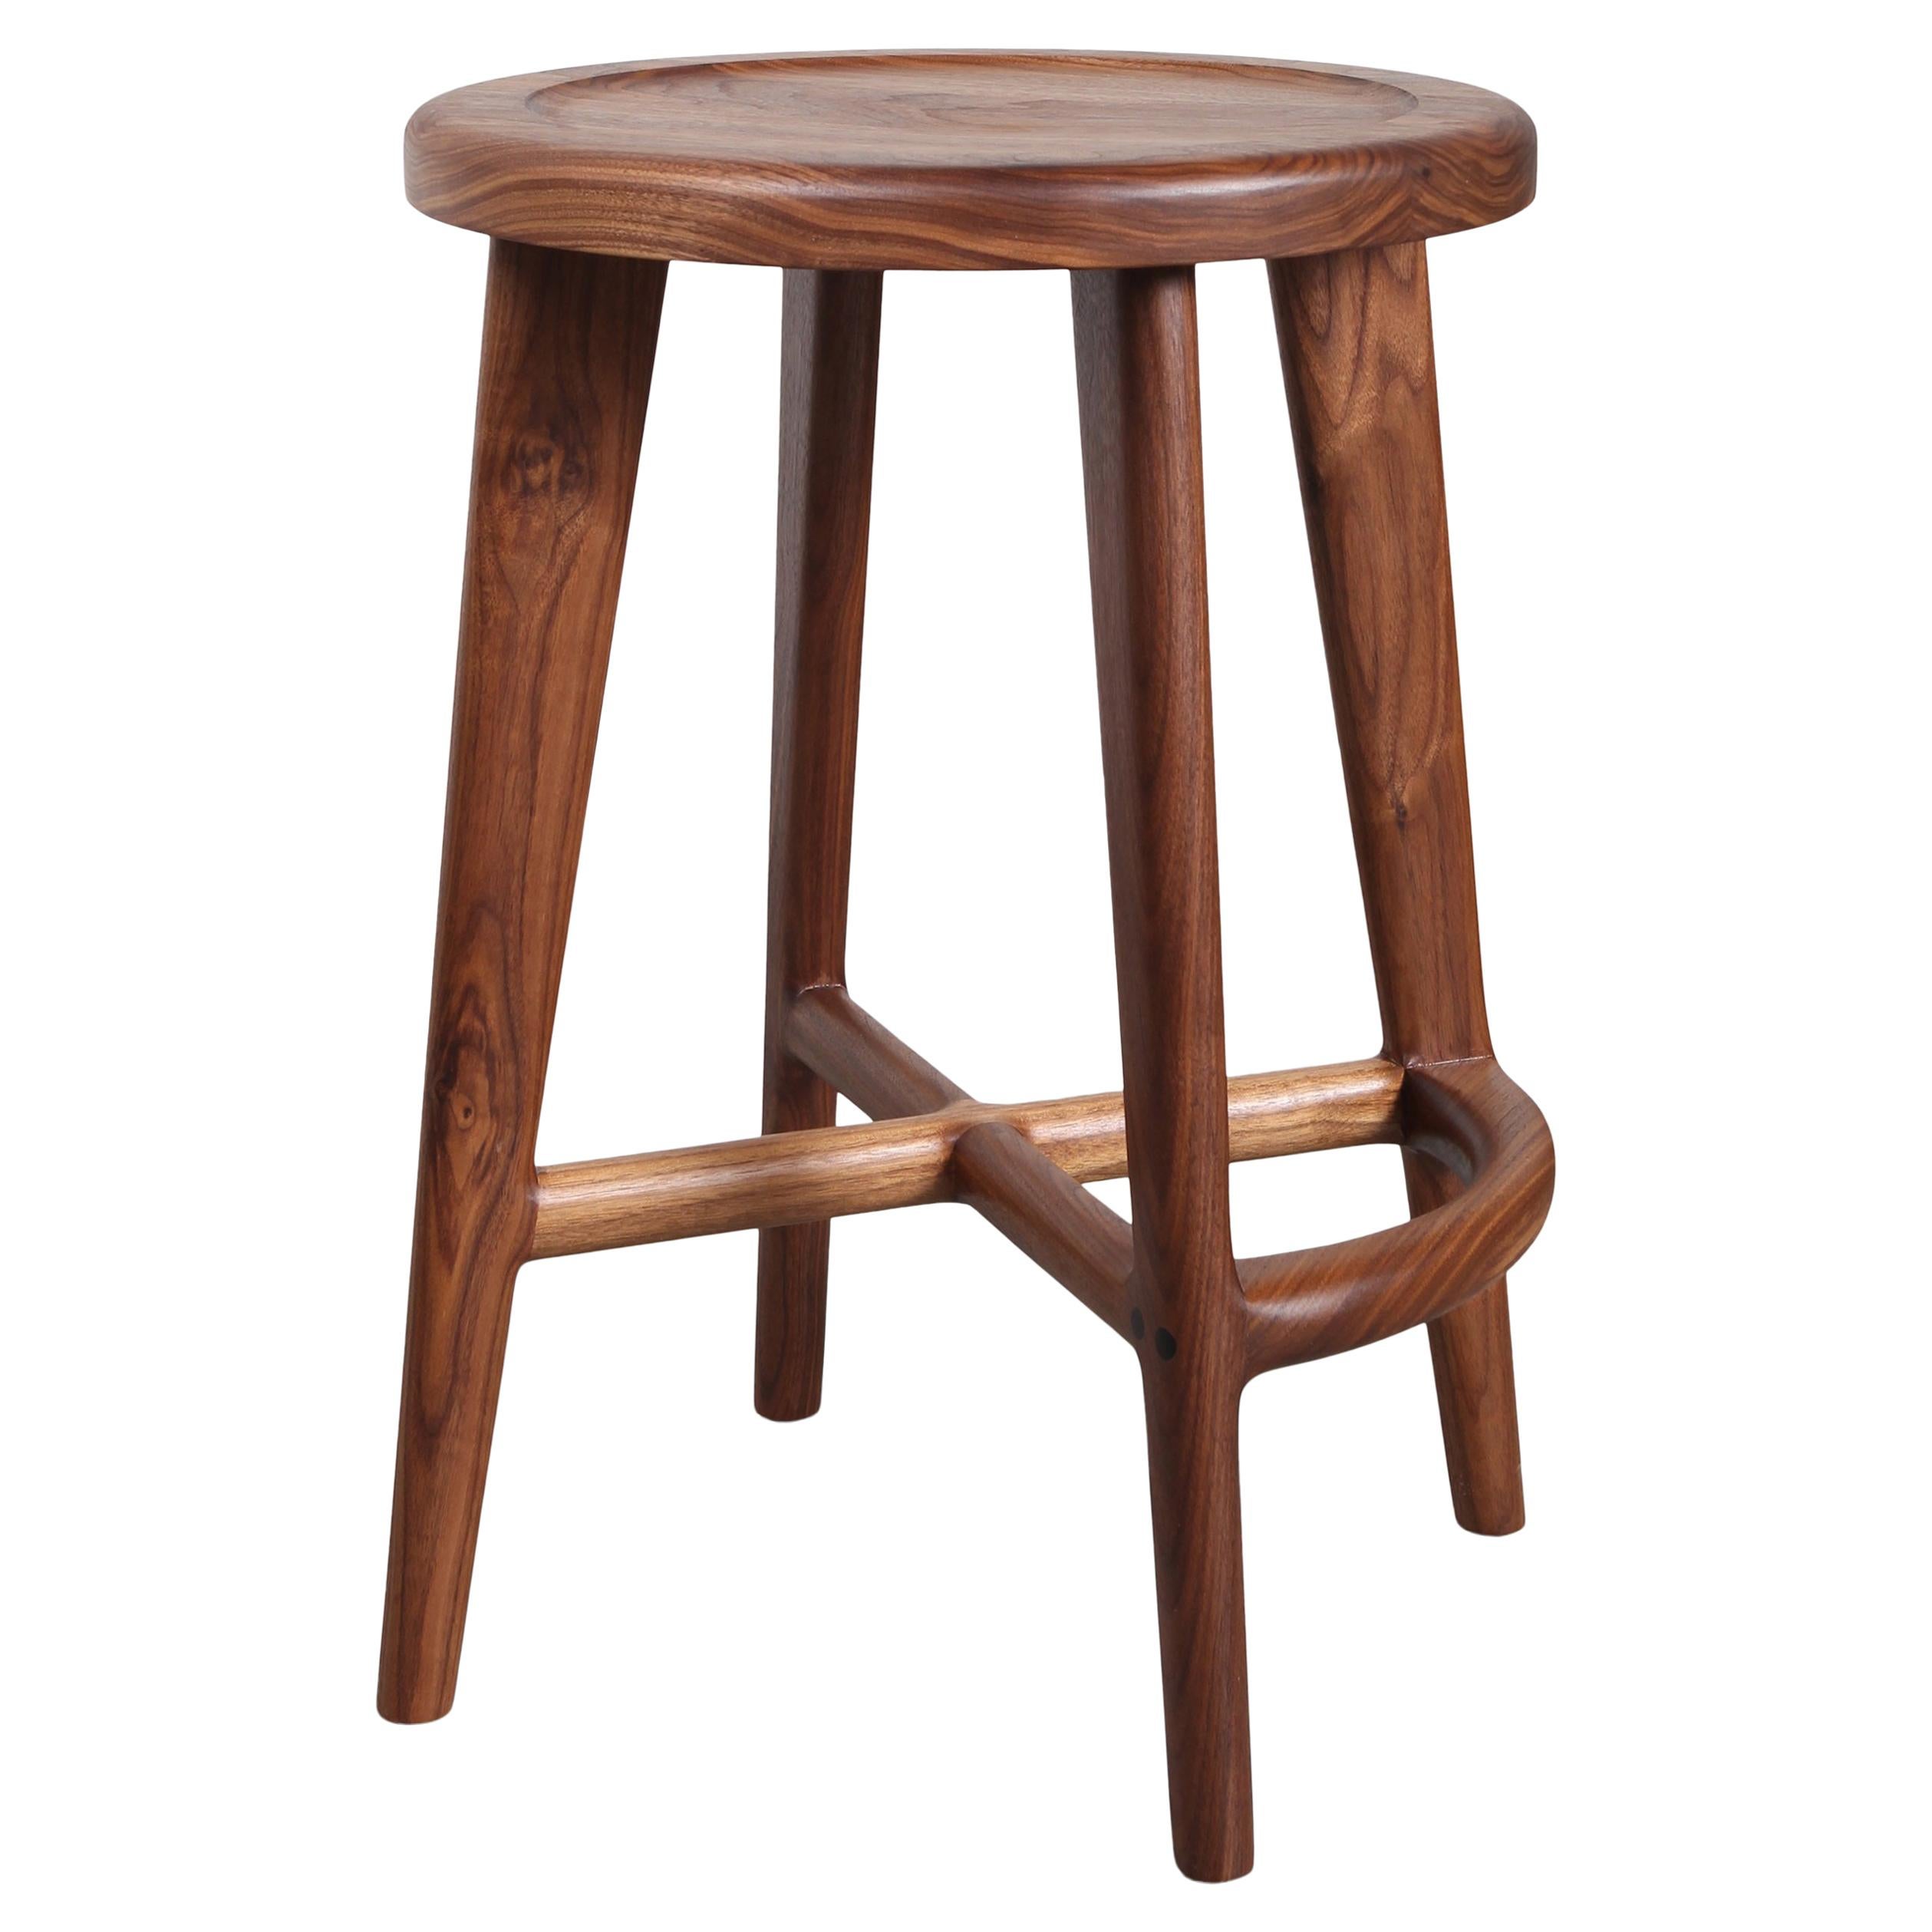 A Classic design that will beautifully suit any home interior. Crafted from solid American black walnut, wood is hand-selected for color uniformity and quality. Our counter stools feature generously sized seats, sculpted for comfort.

Joinery is